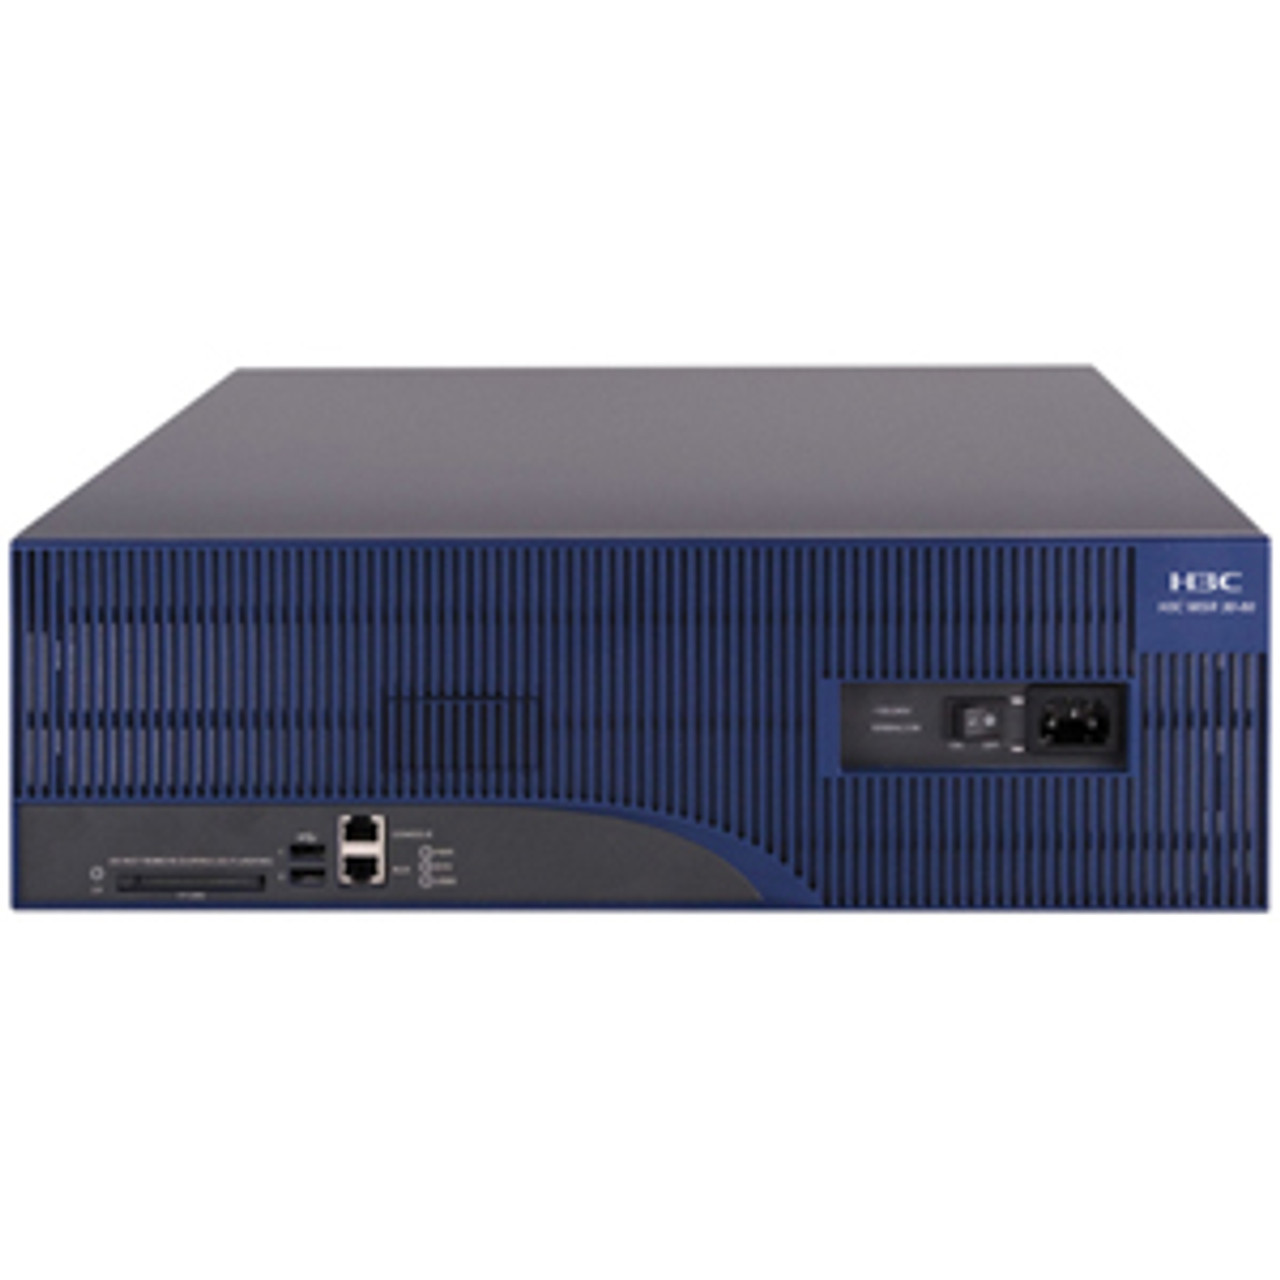 JF804A#ABA HP Amsr3060 Poe Multiservice Router (Refurbished)